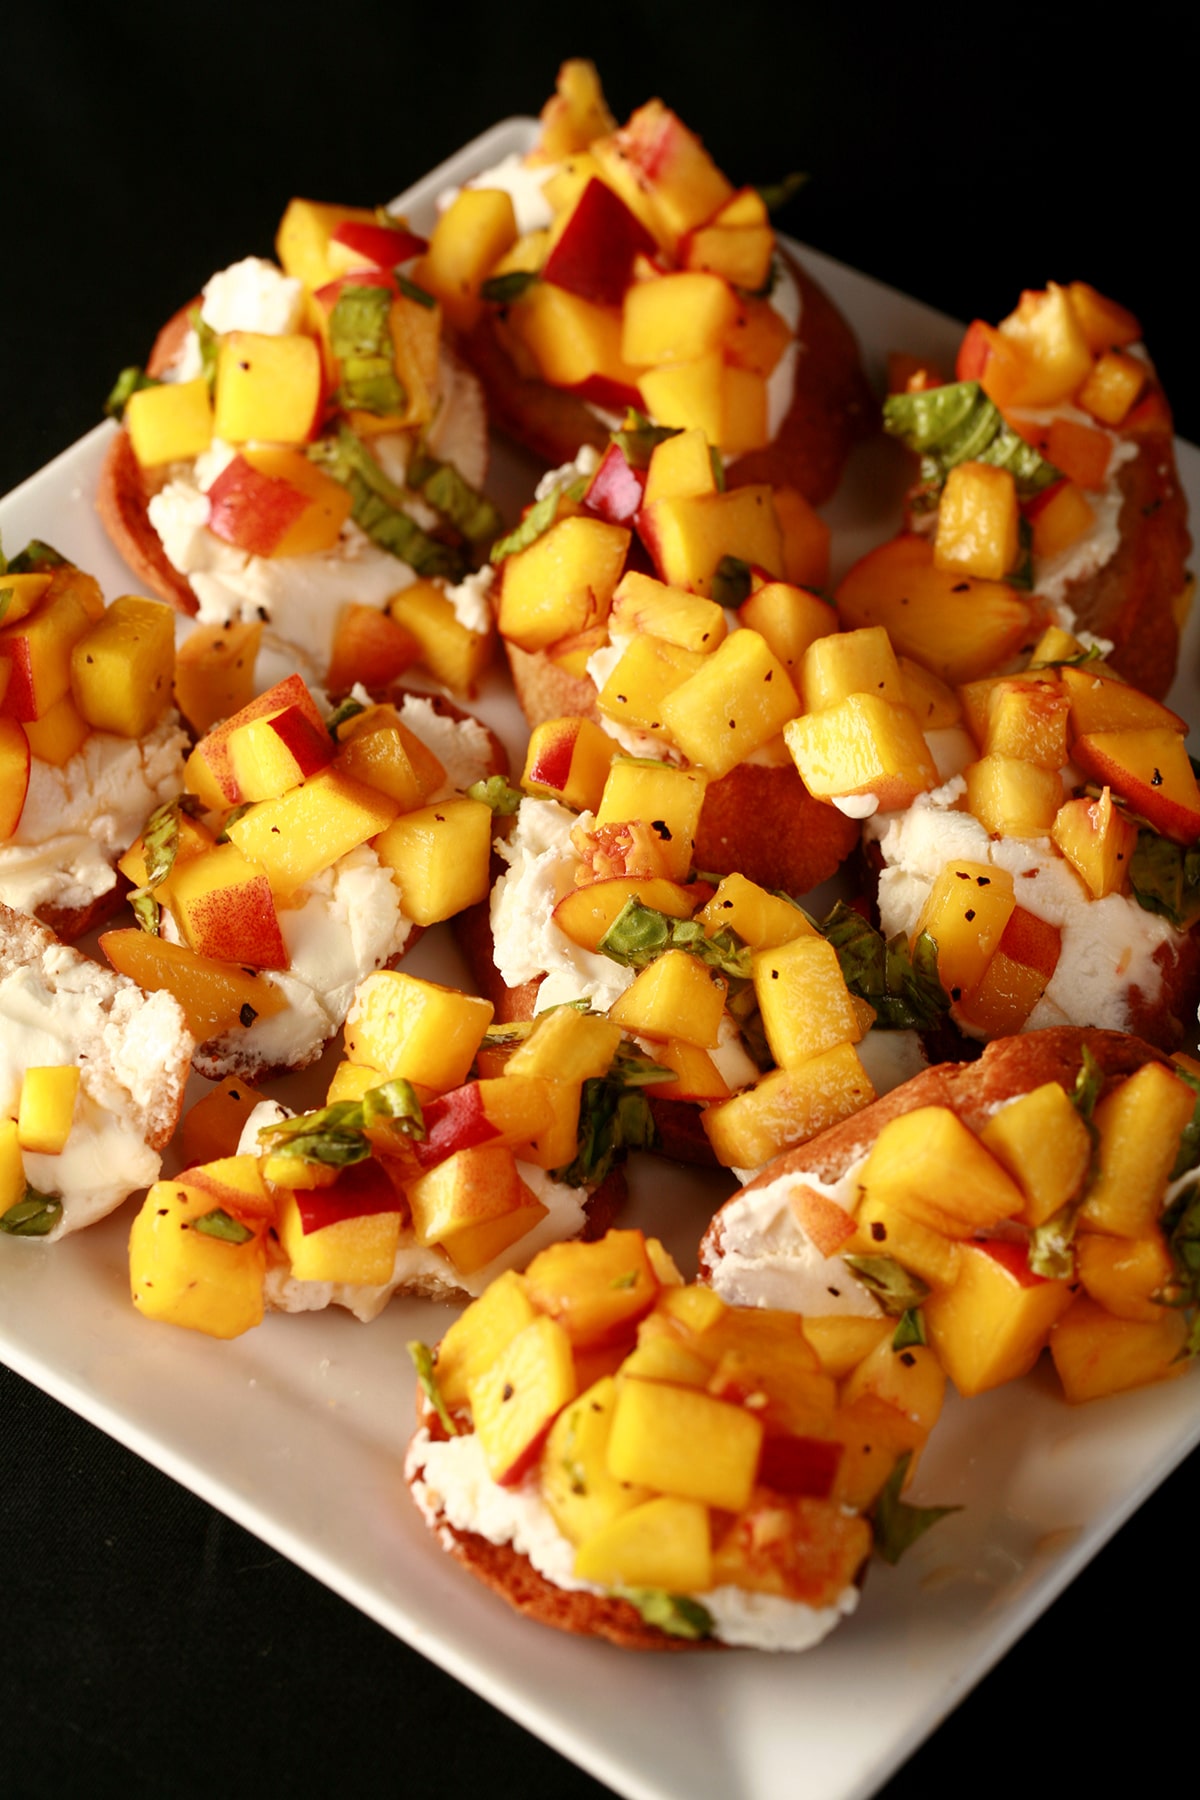 An oval plate with several servings of balsamic peach bruschetta - toasted baguette slices with goat cheese, chopped peaches, and ribbons of fresh basil.